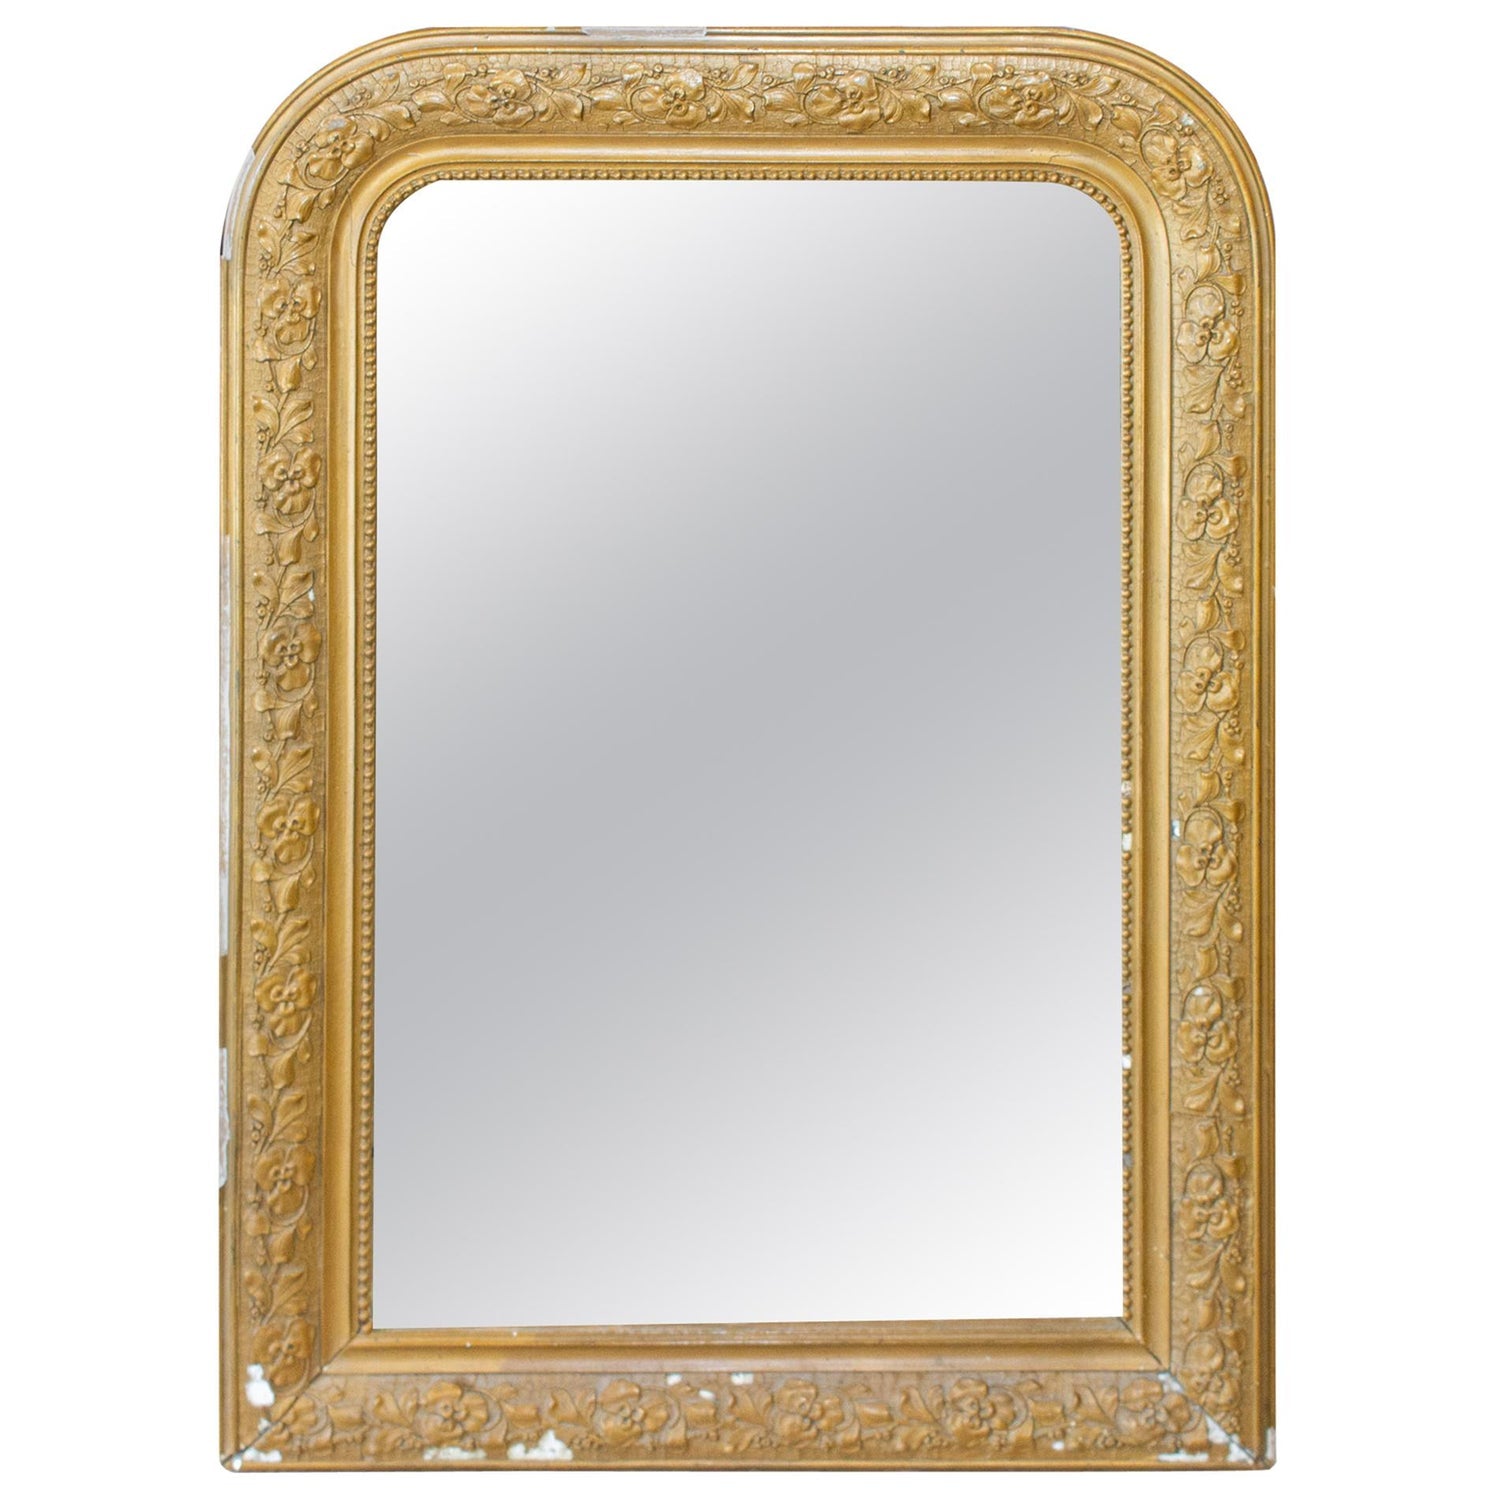 SOLD $495 .. antique Louis Philippe French gilt mirror 21.5” x 28